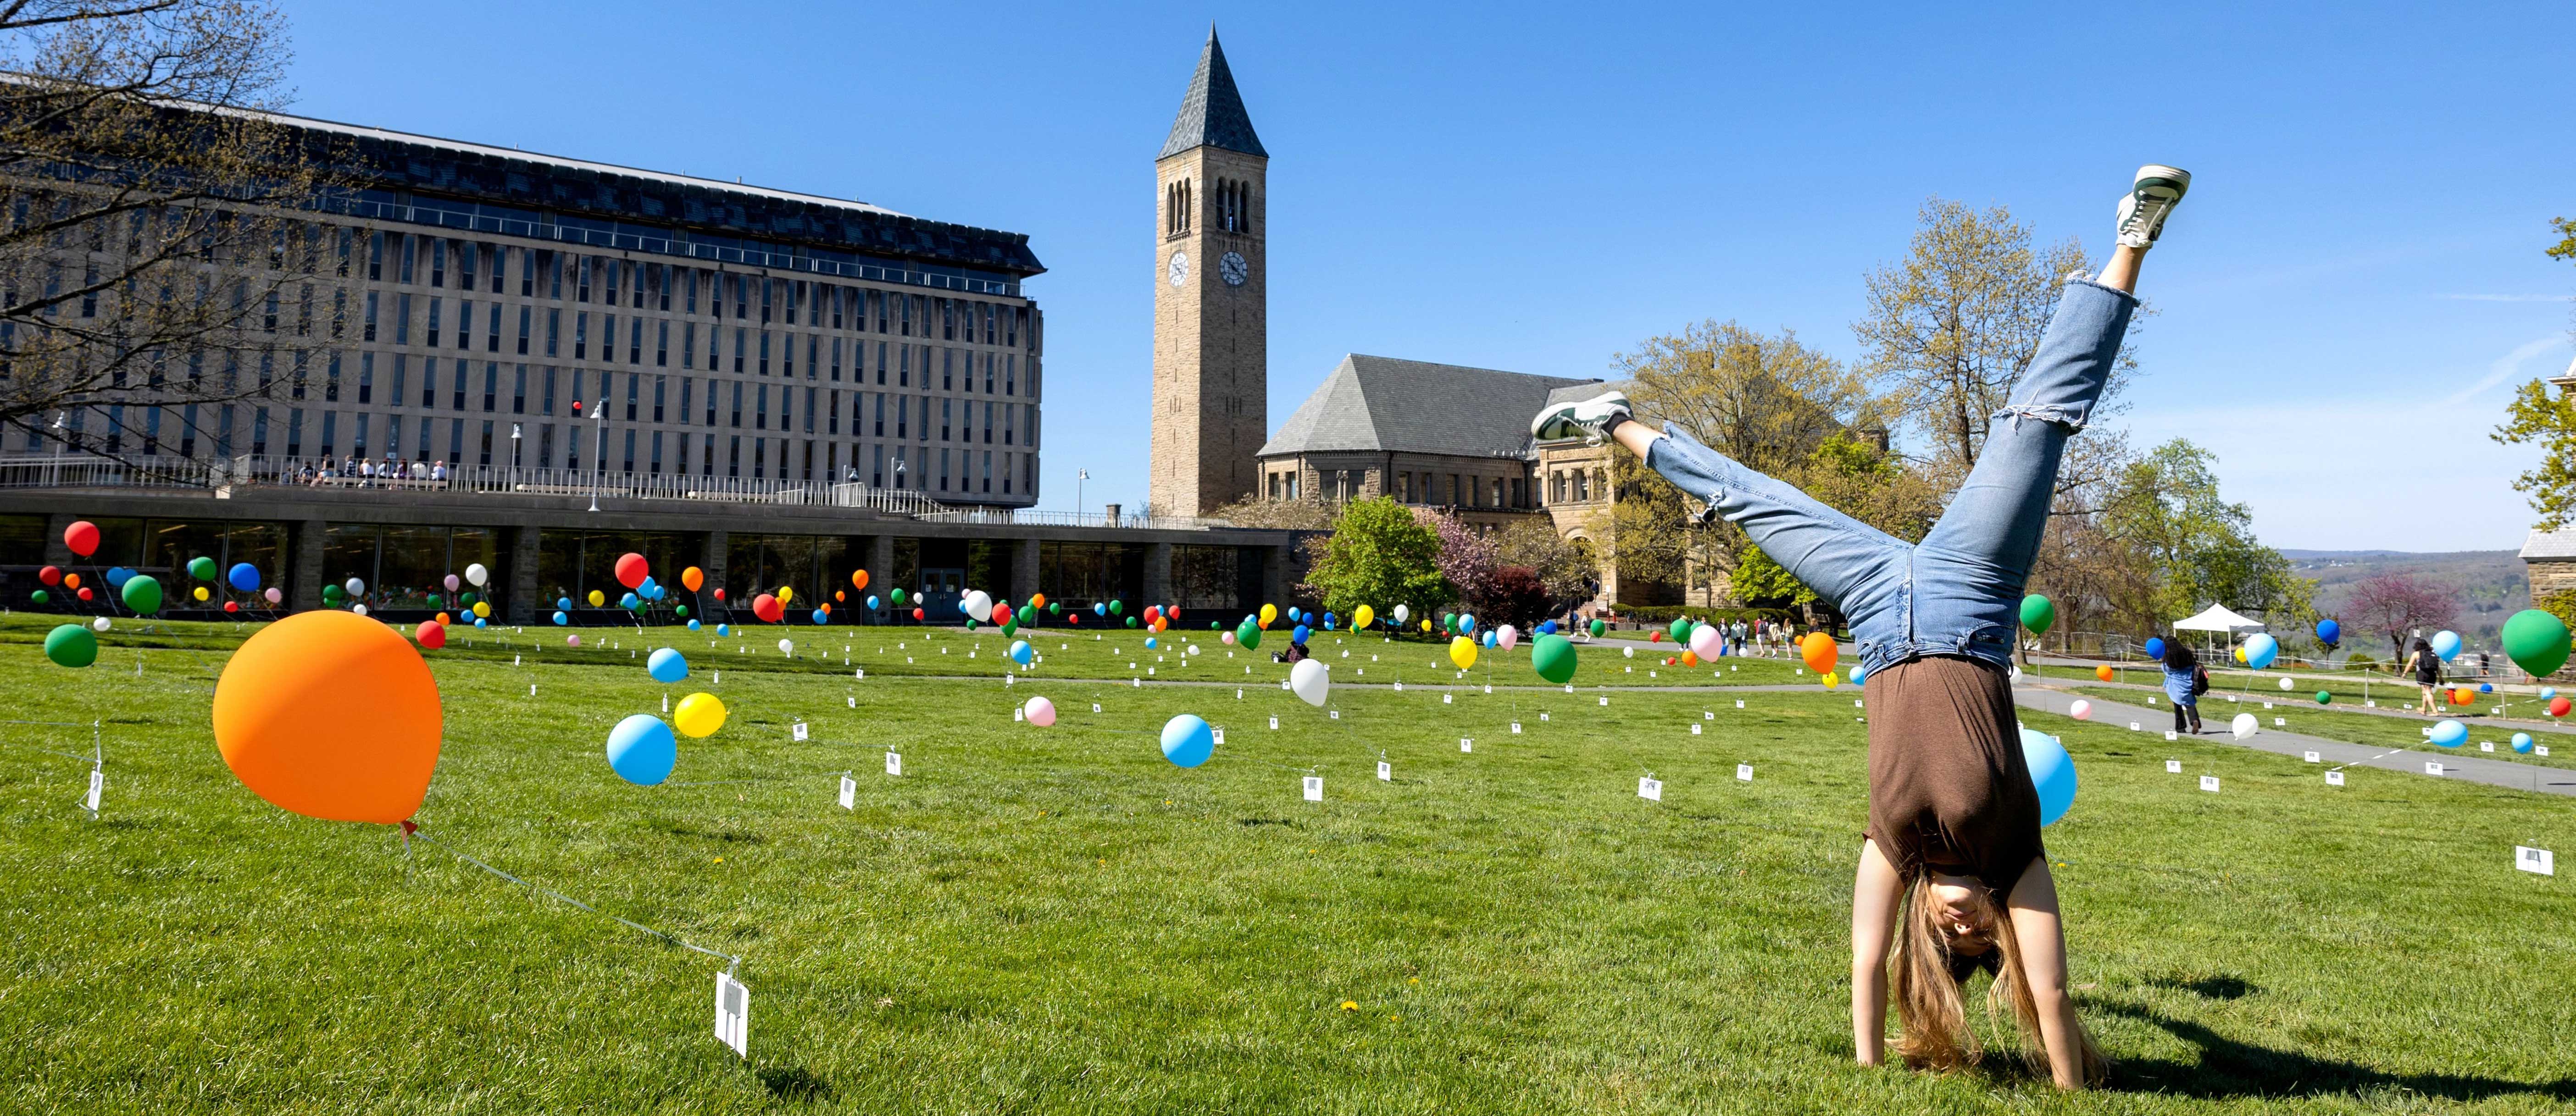 Student does a handstand amid colorful balloons at "Cornell Lifted" event on the Arts Quad, clocktower in background